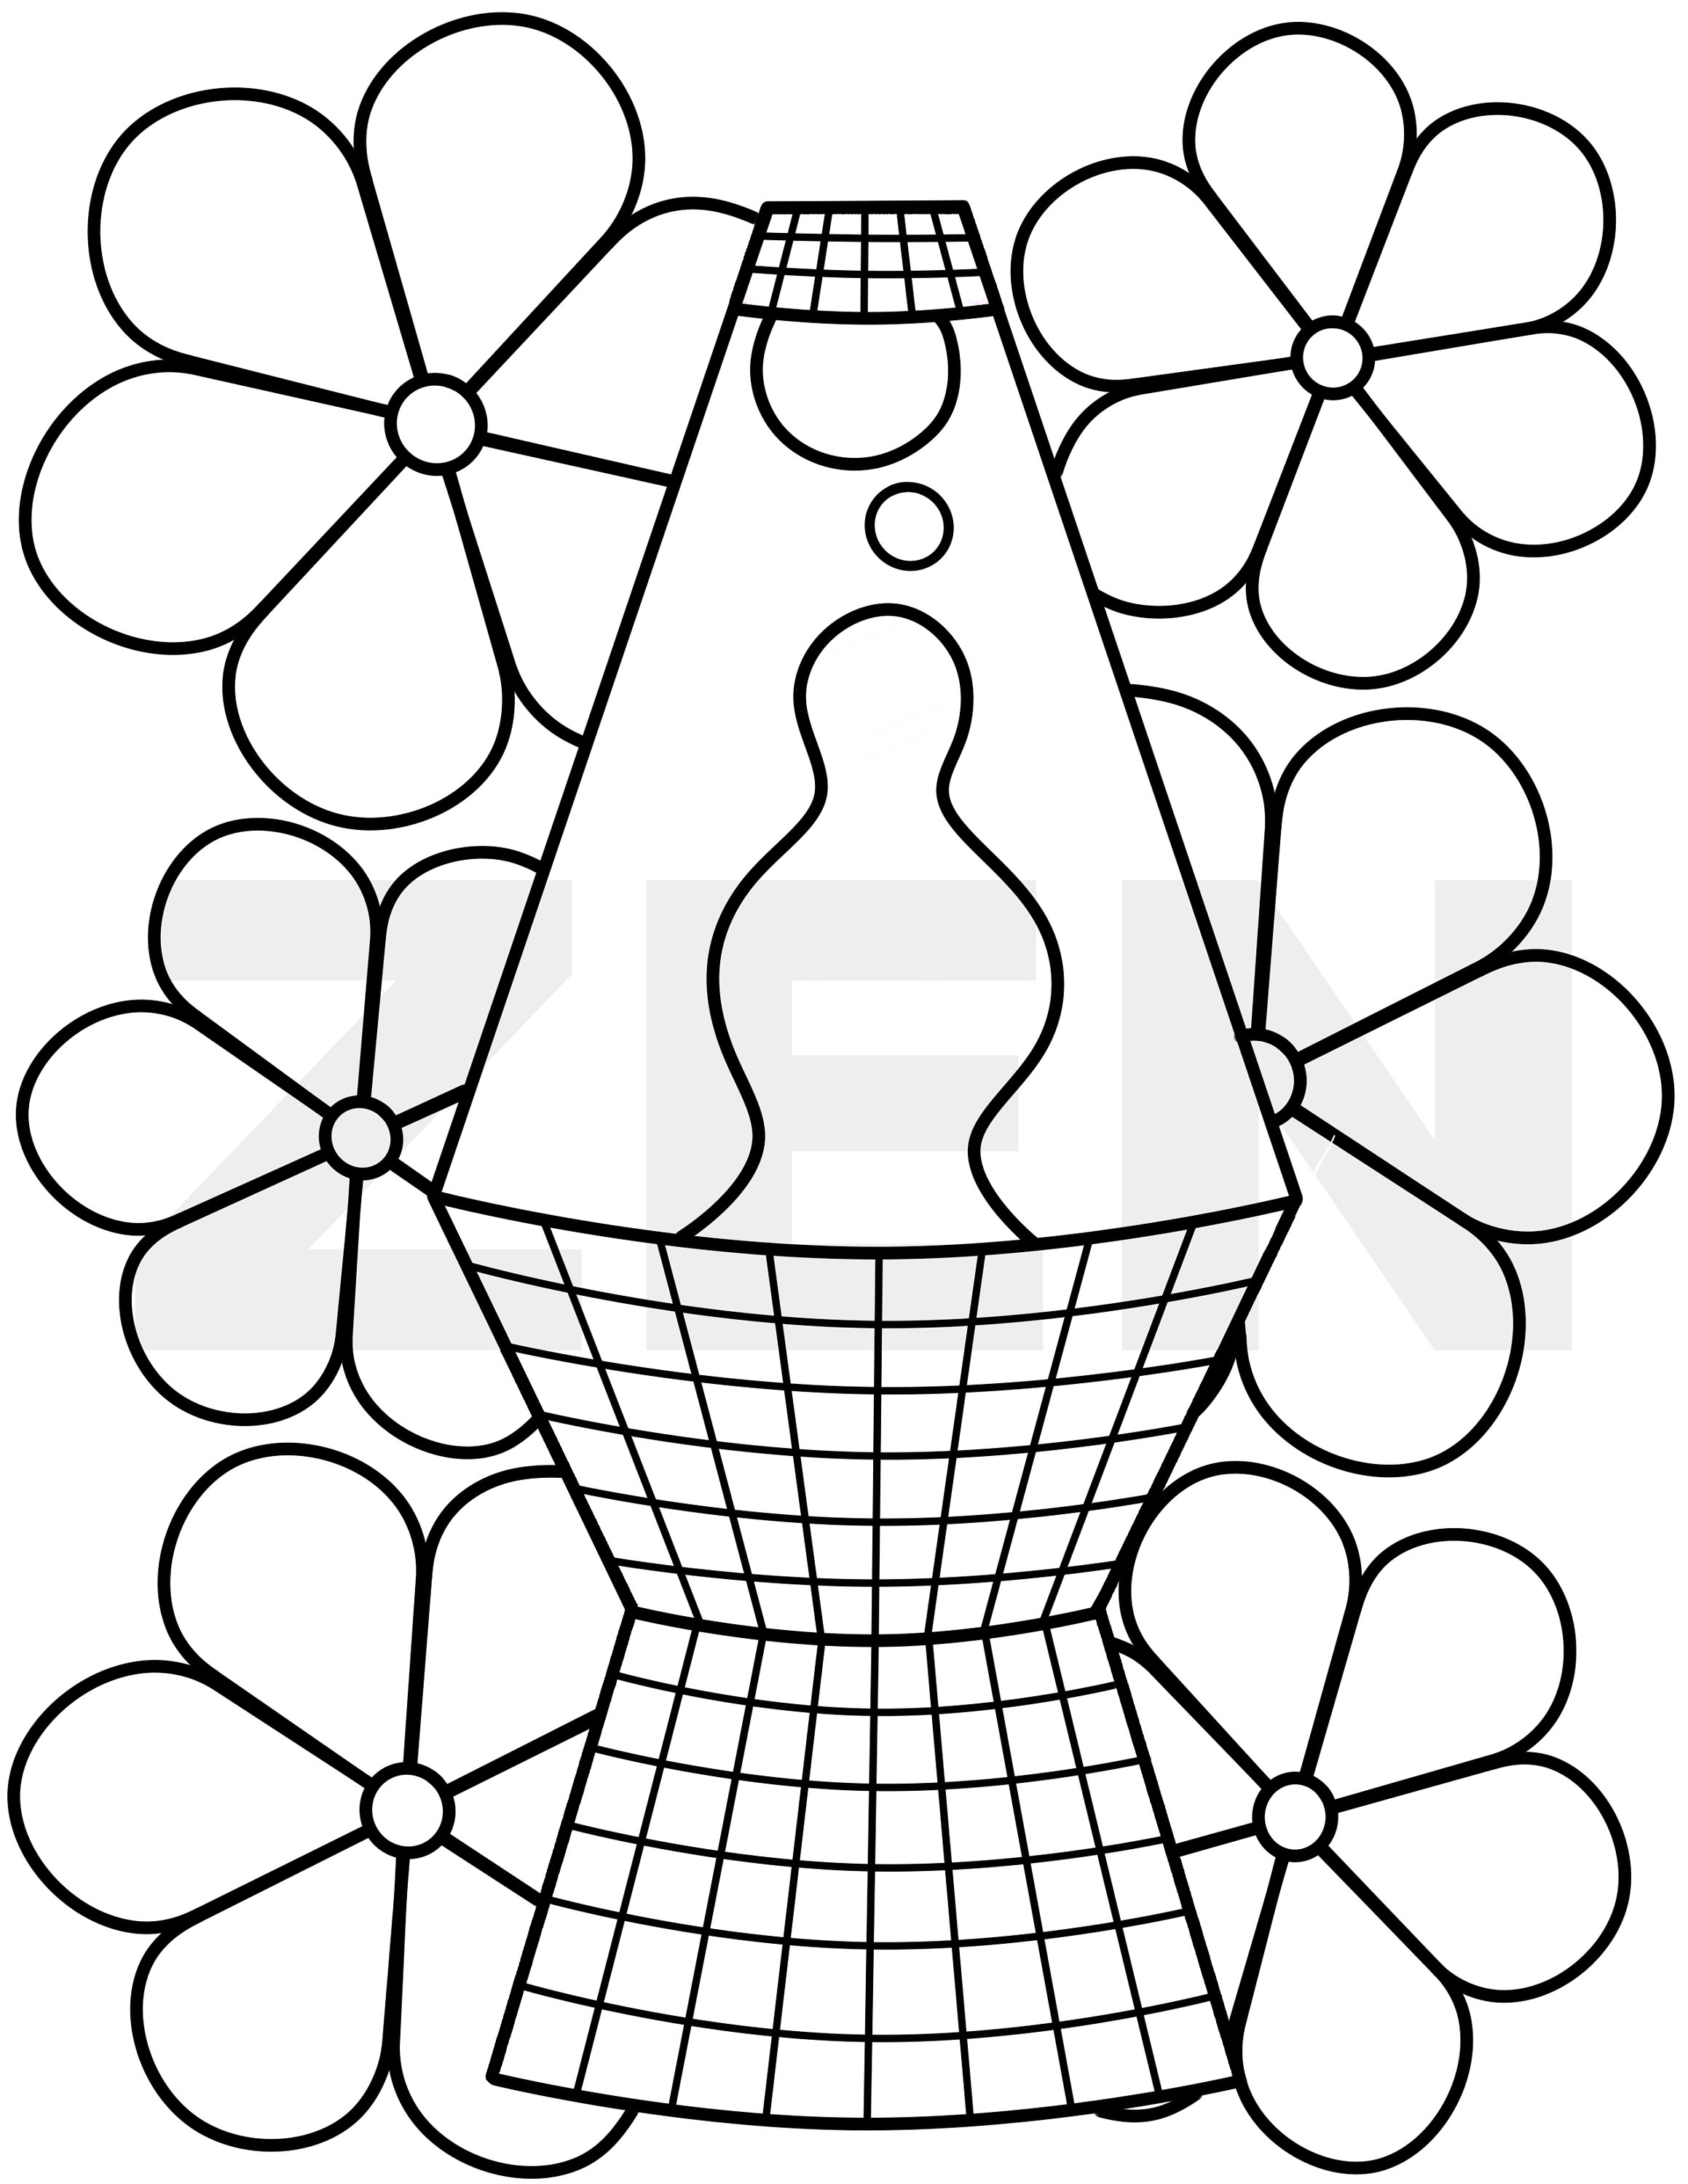 Lava Lamp Printable Adult Coloring Page Coloring Page for - Etsy